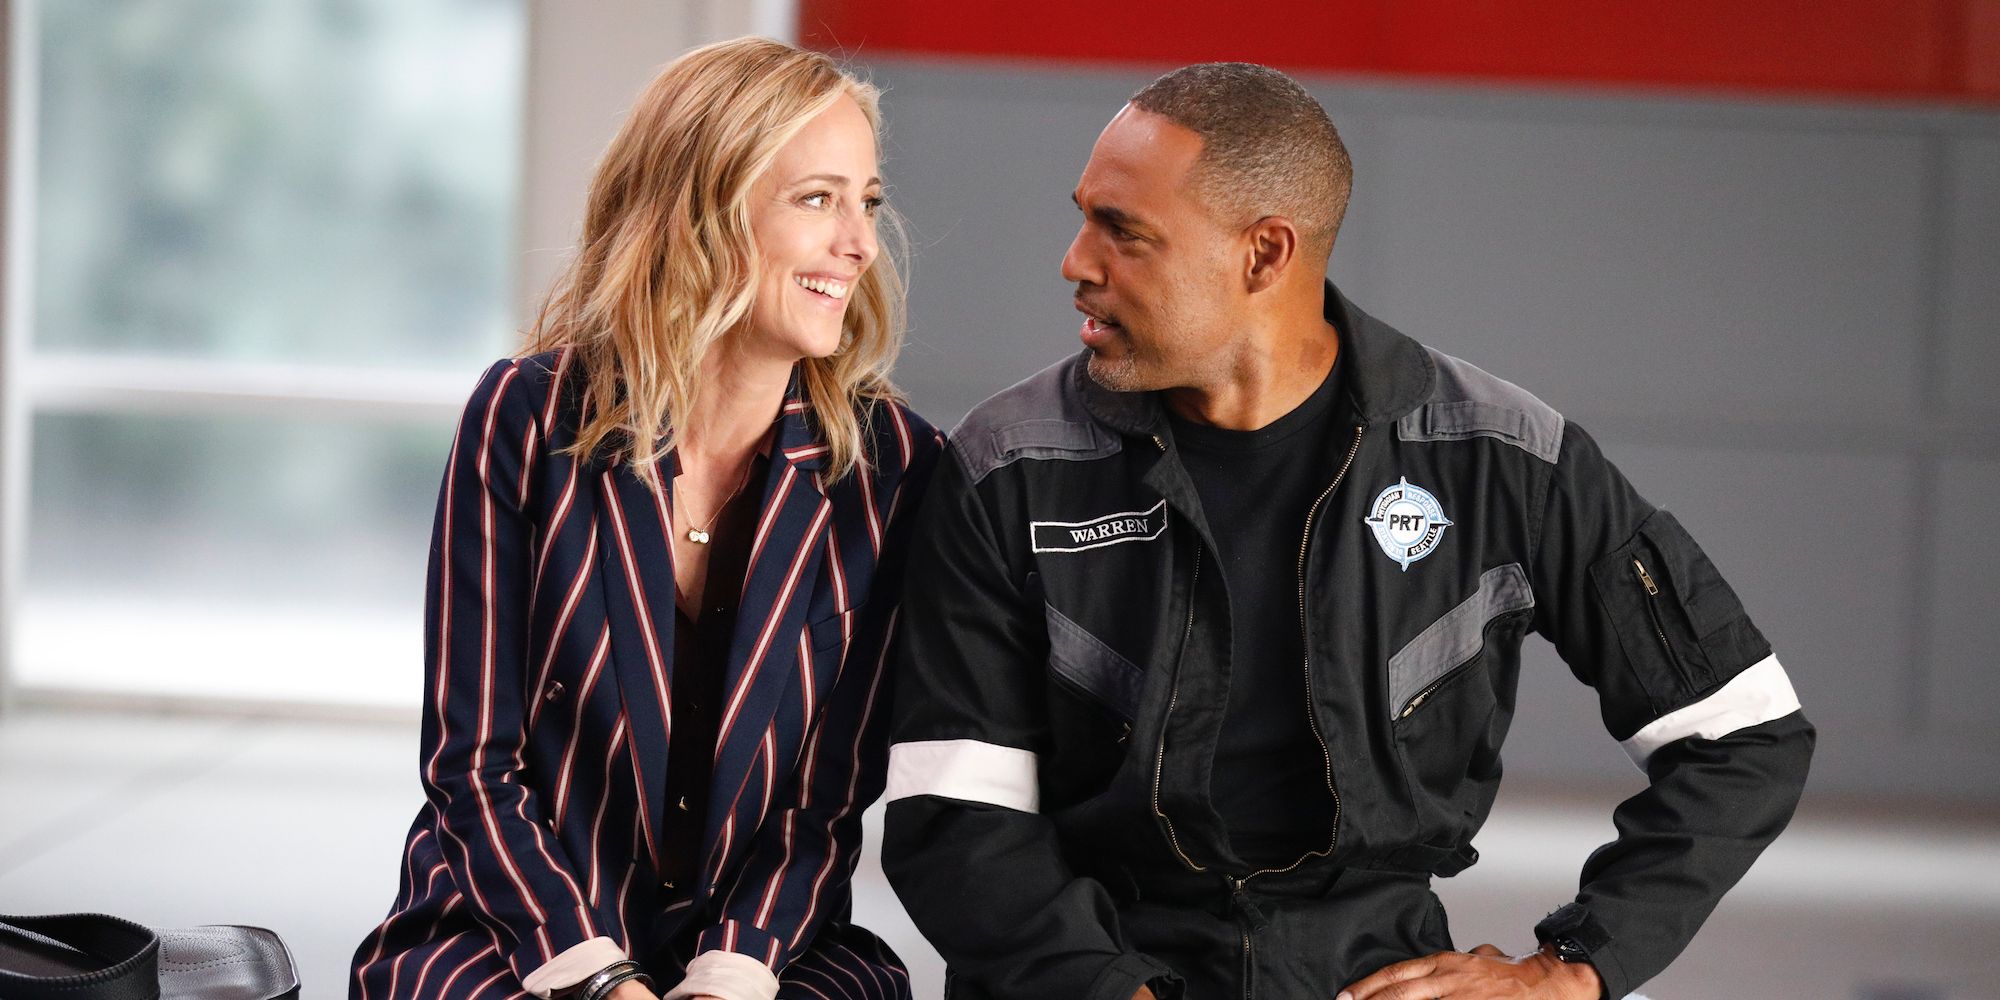 When Does Station 19 Return and Where Can I Watch It?